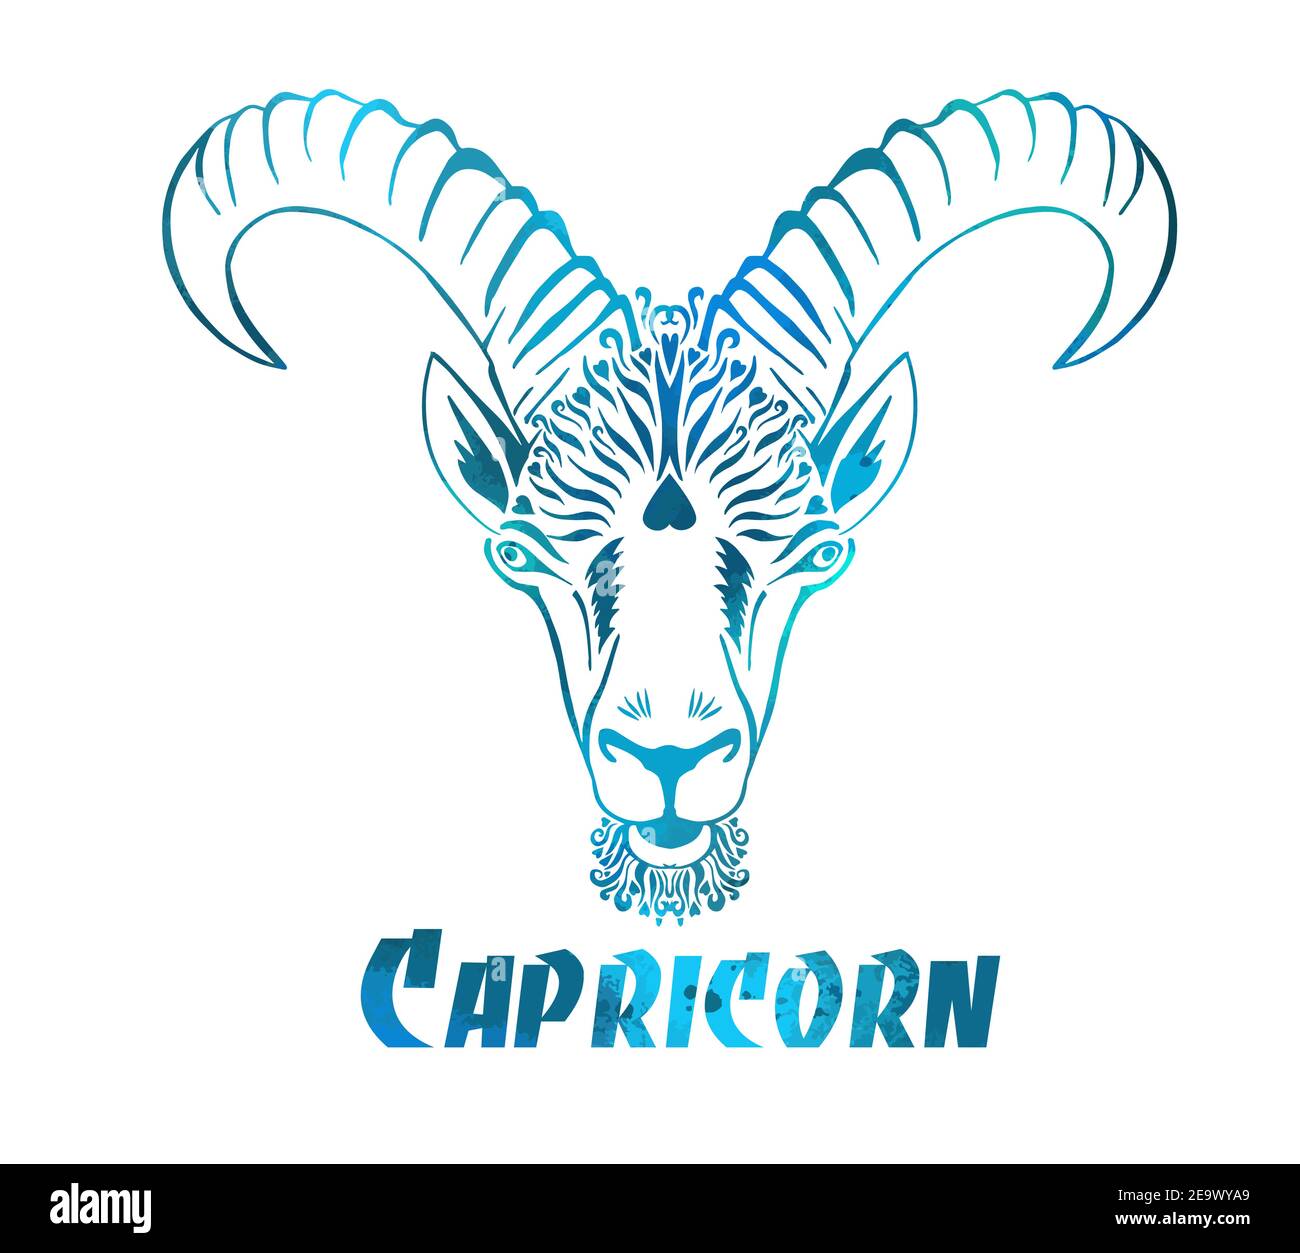 Capricorn is the sign of the zodiac. The goat's head. Print on a T-shirt. Vector illustration Stock Vector